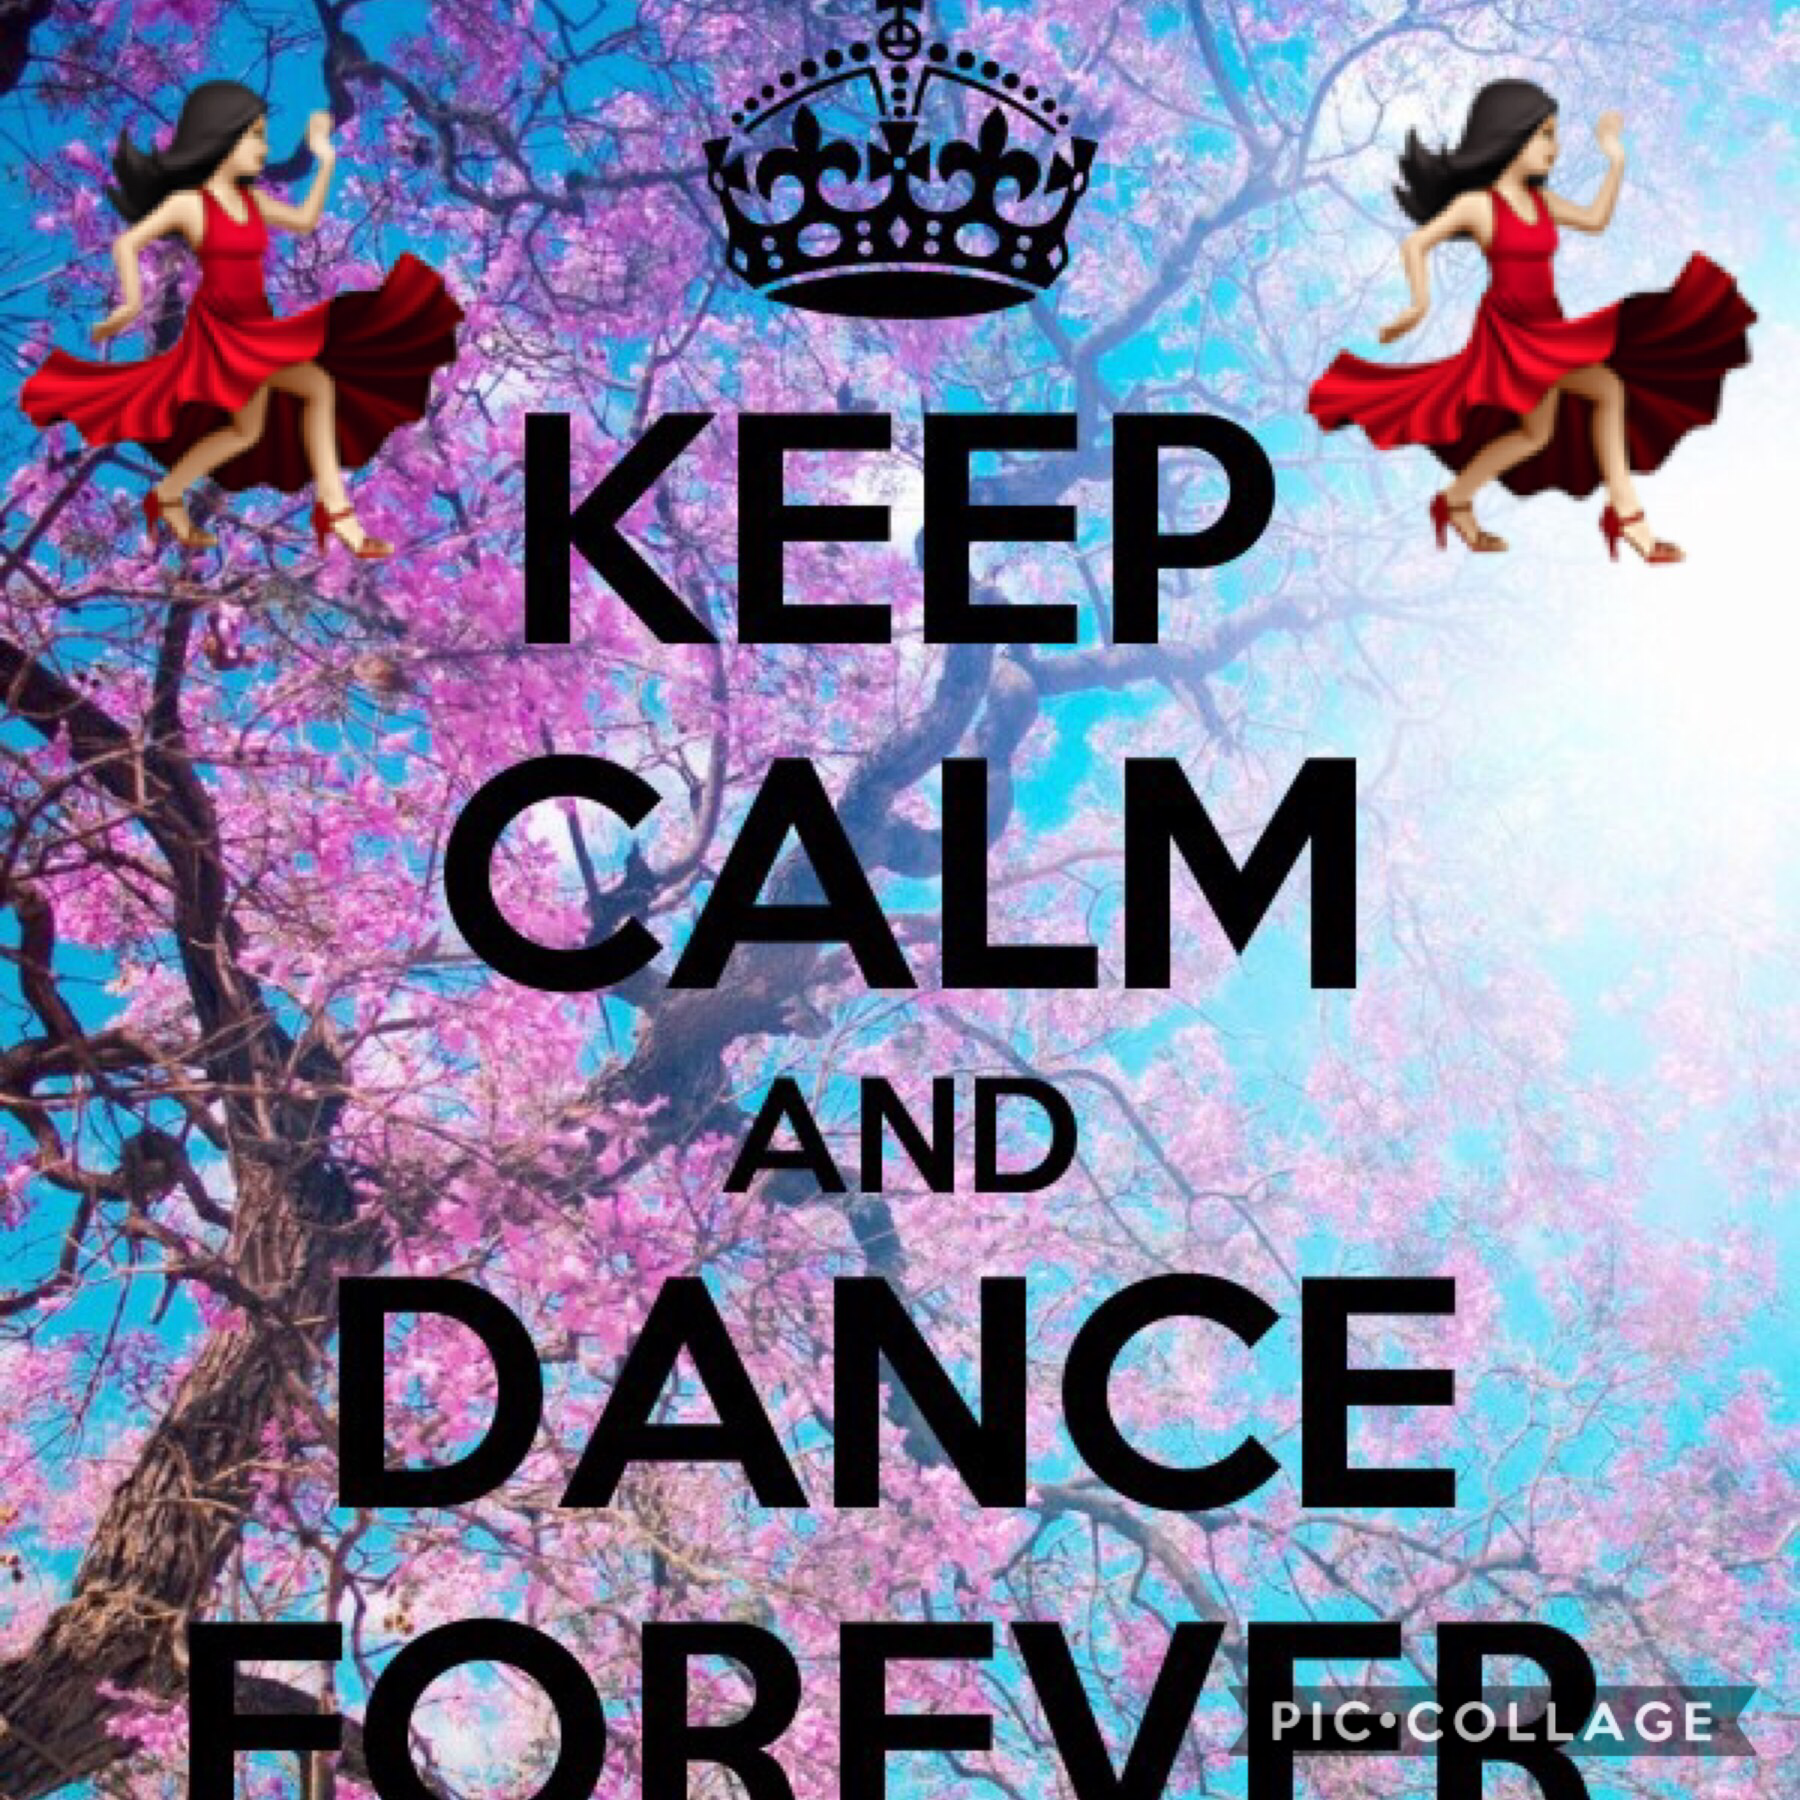 Keep calm and dance forever❤️💃🏻